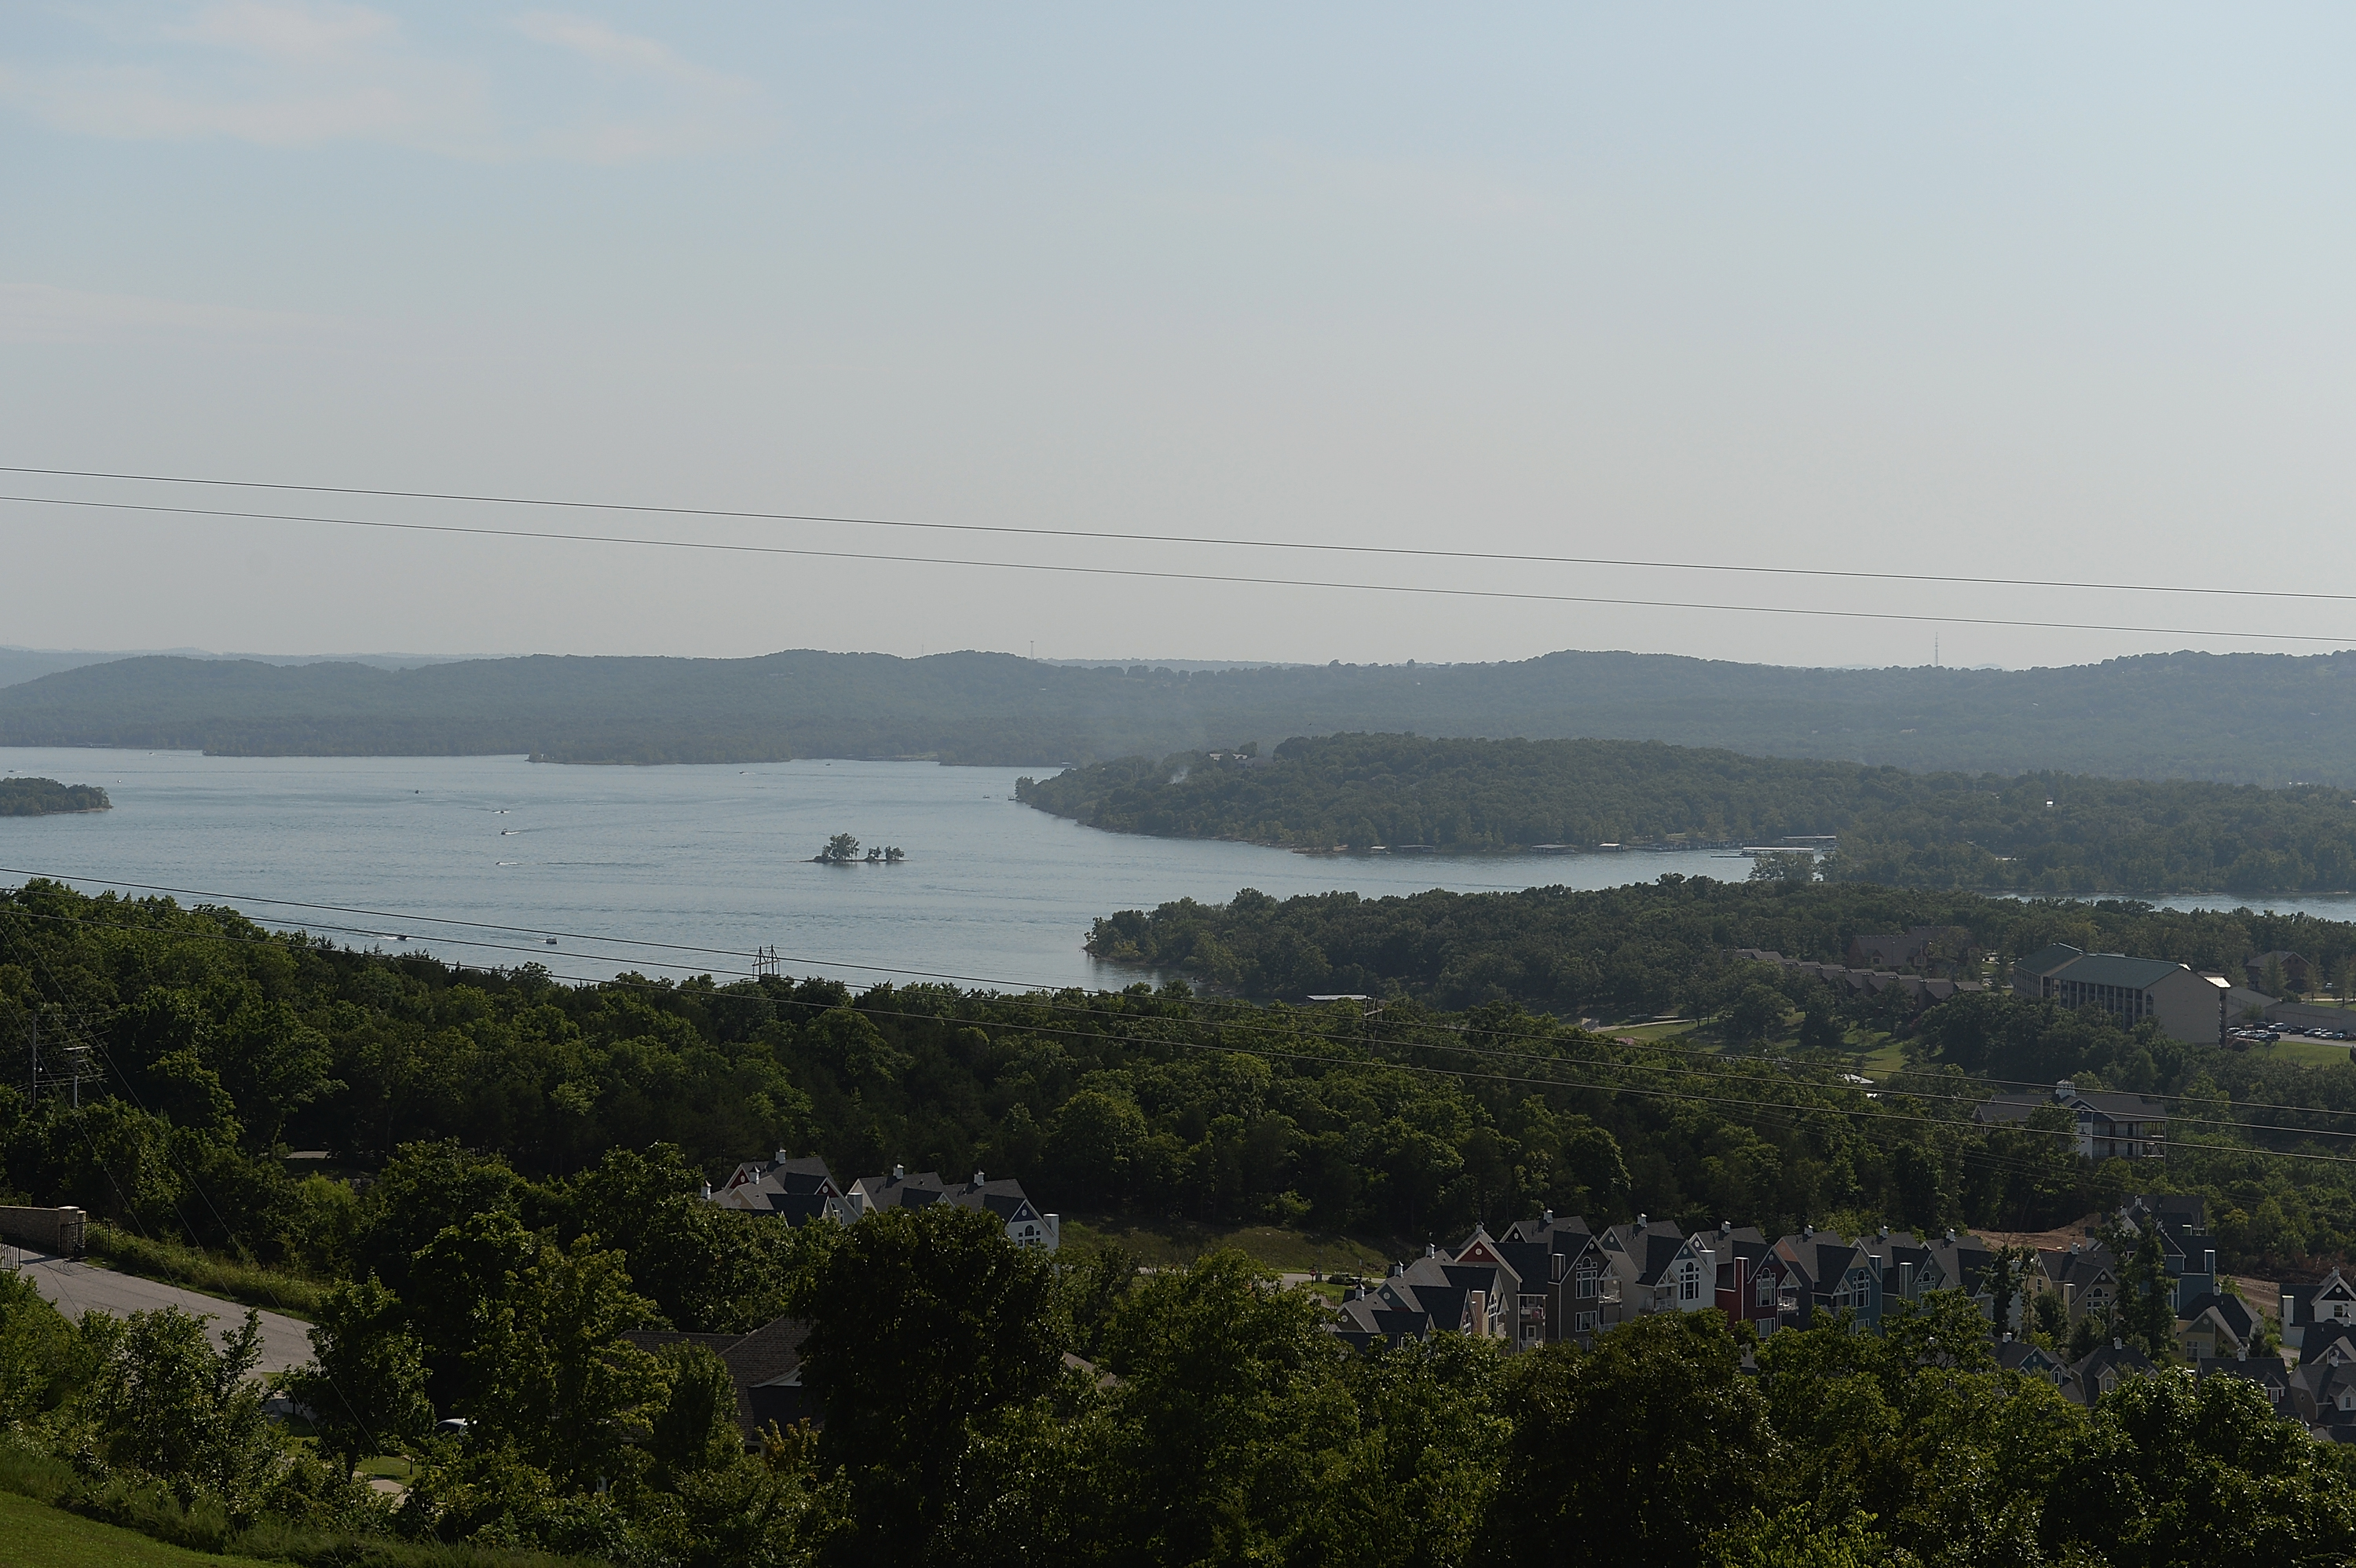 Duck Boat Capsizes In Table Rock Lake During Storm Killing Over 10 People